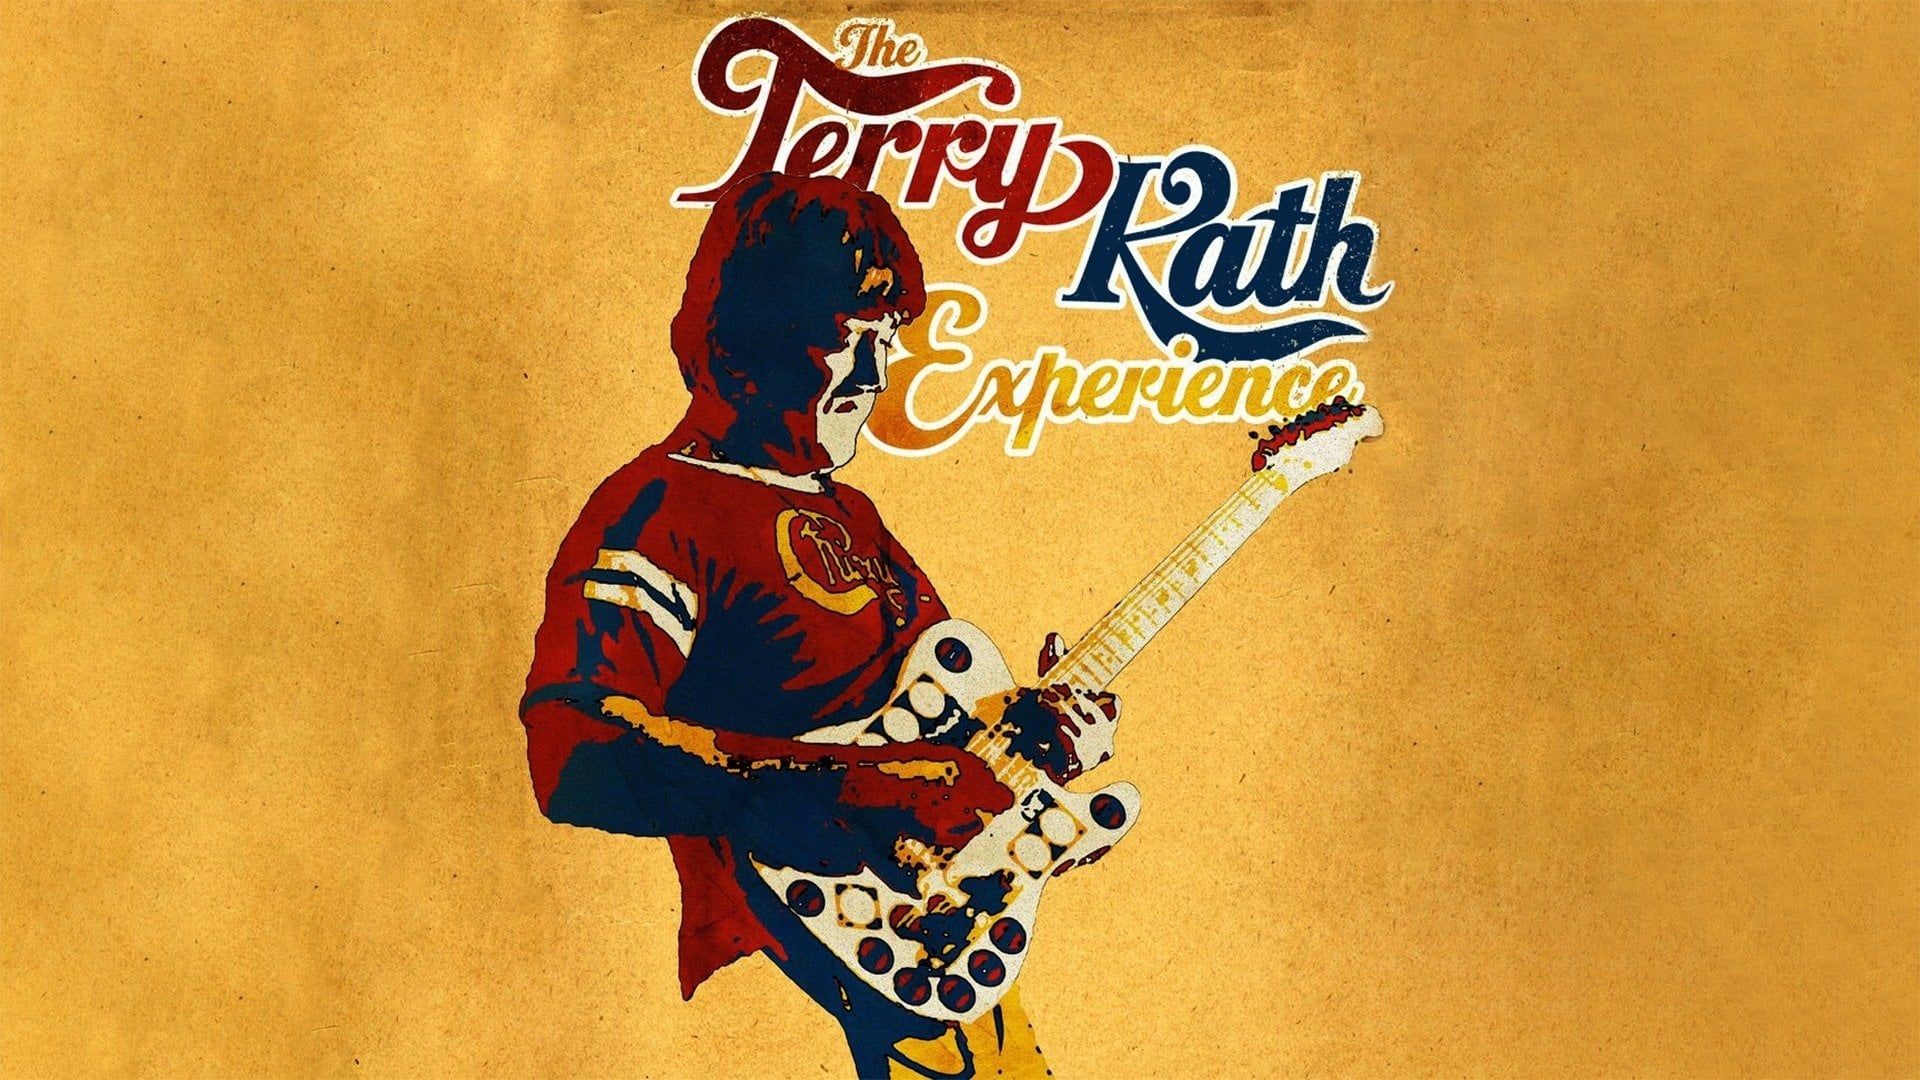 The Terry Kath Experience background